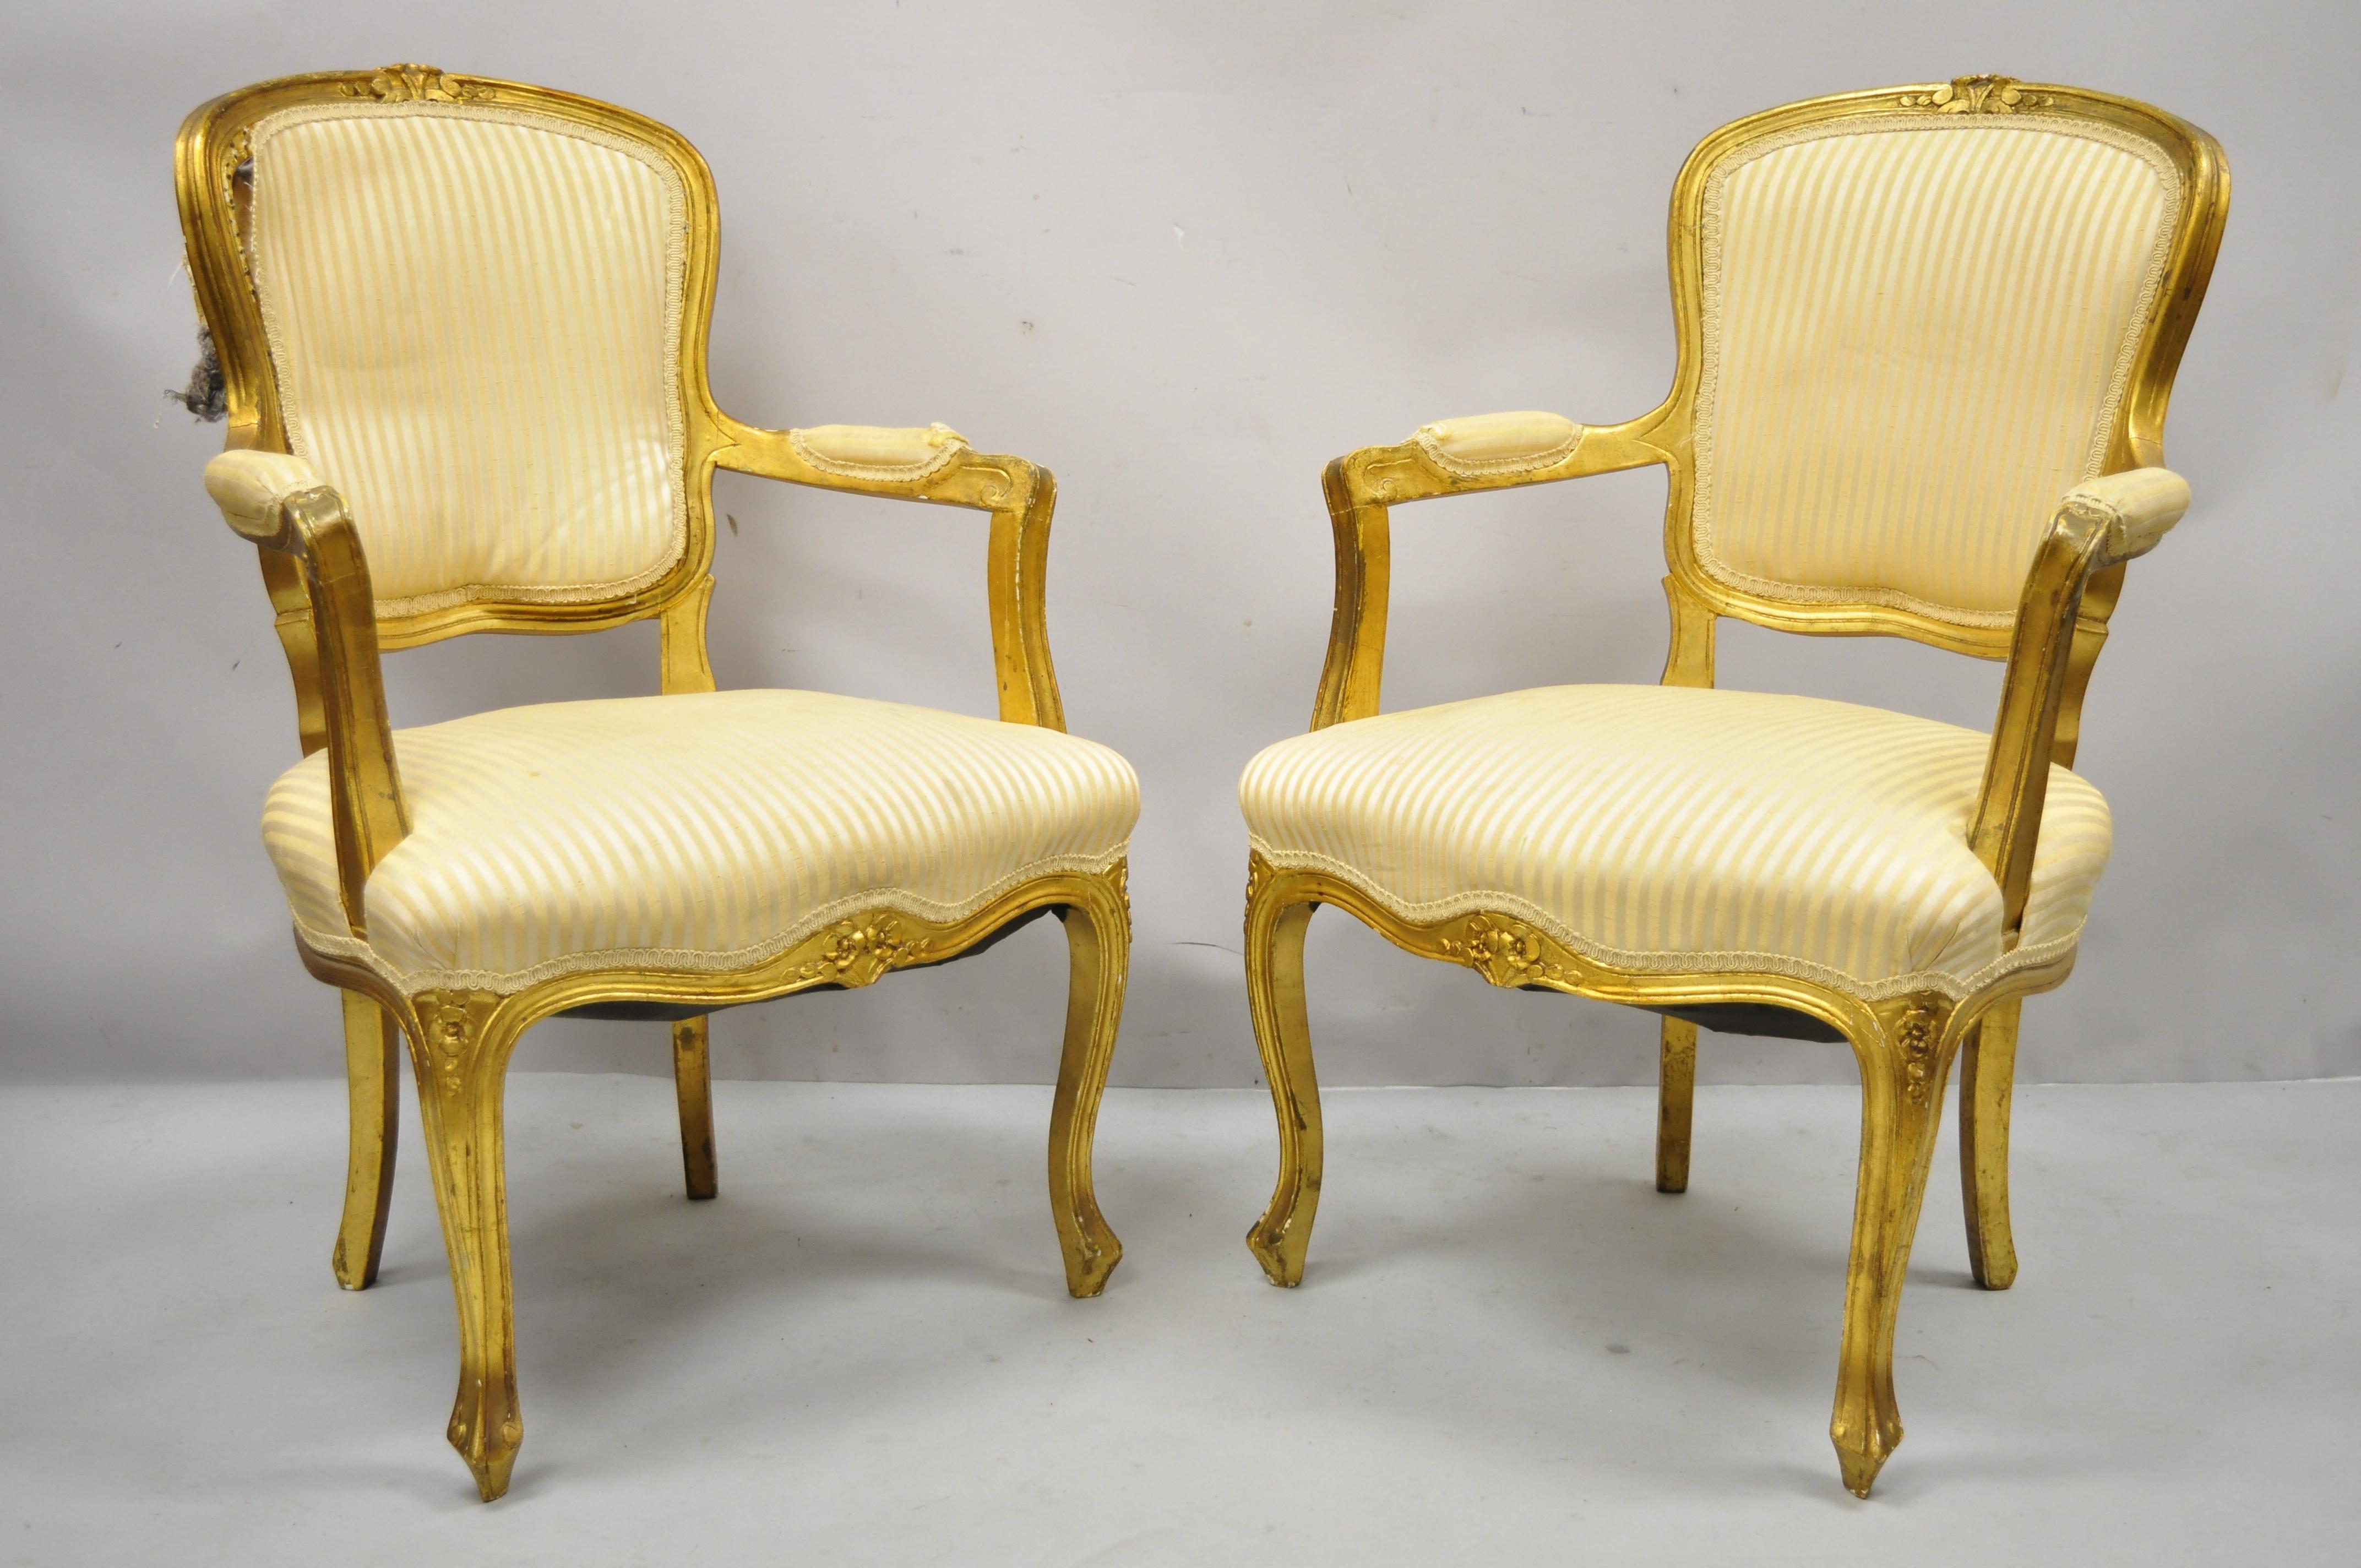 French Louis XV style gold gilt Fauteuil arm chairs to refinish DIY project - a Pair. Item features solid wood construction, upholstered armrests, gold distressed finish, cabriole legs, great style and form. Age: Late 20th Century. Measurements: